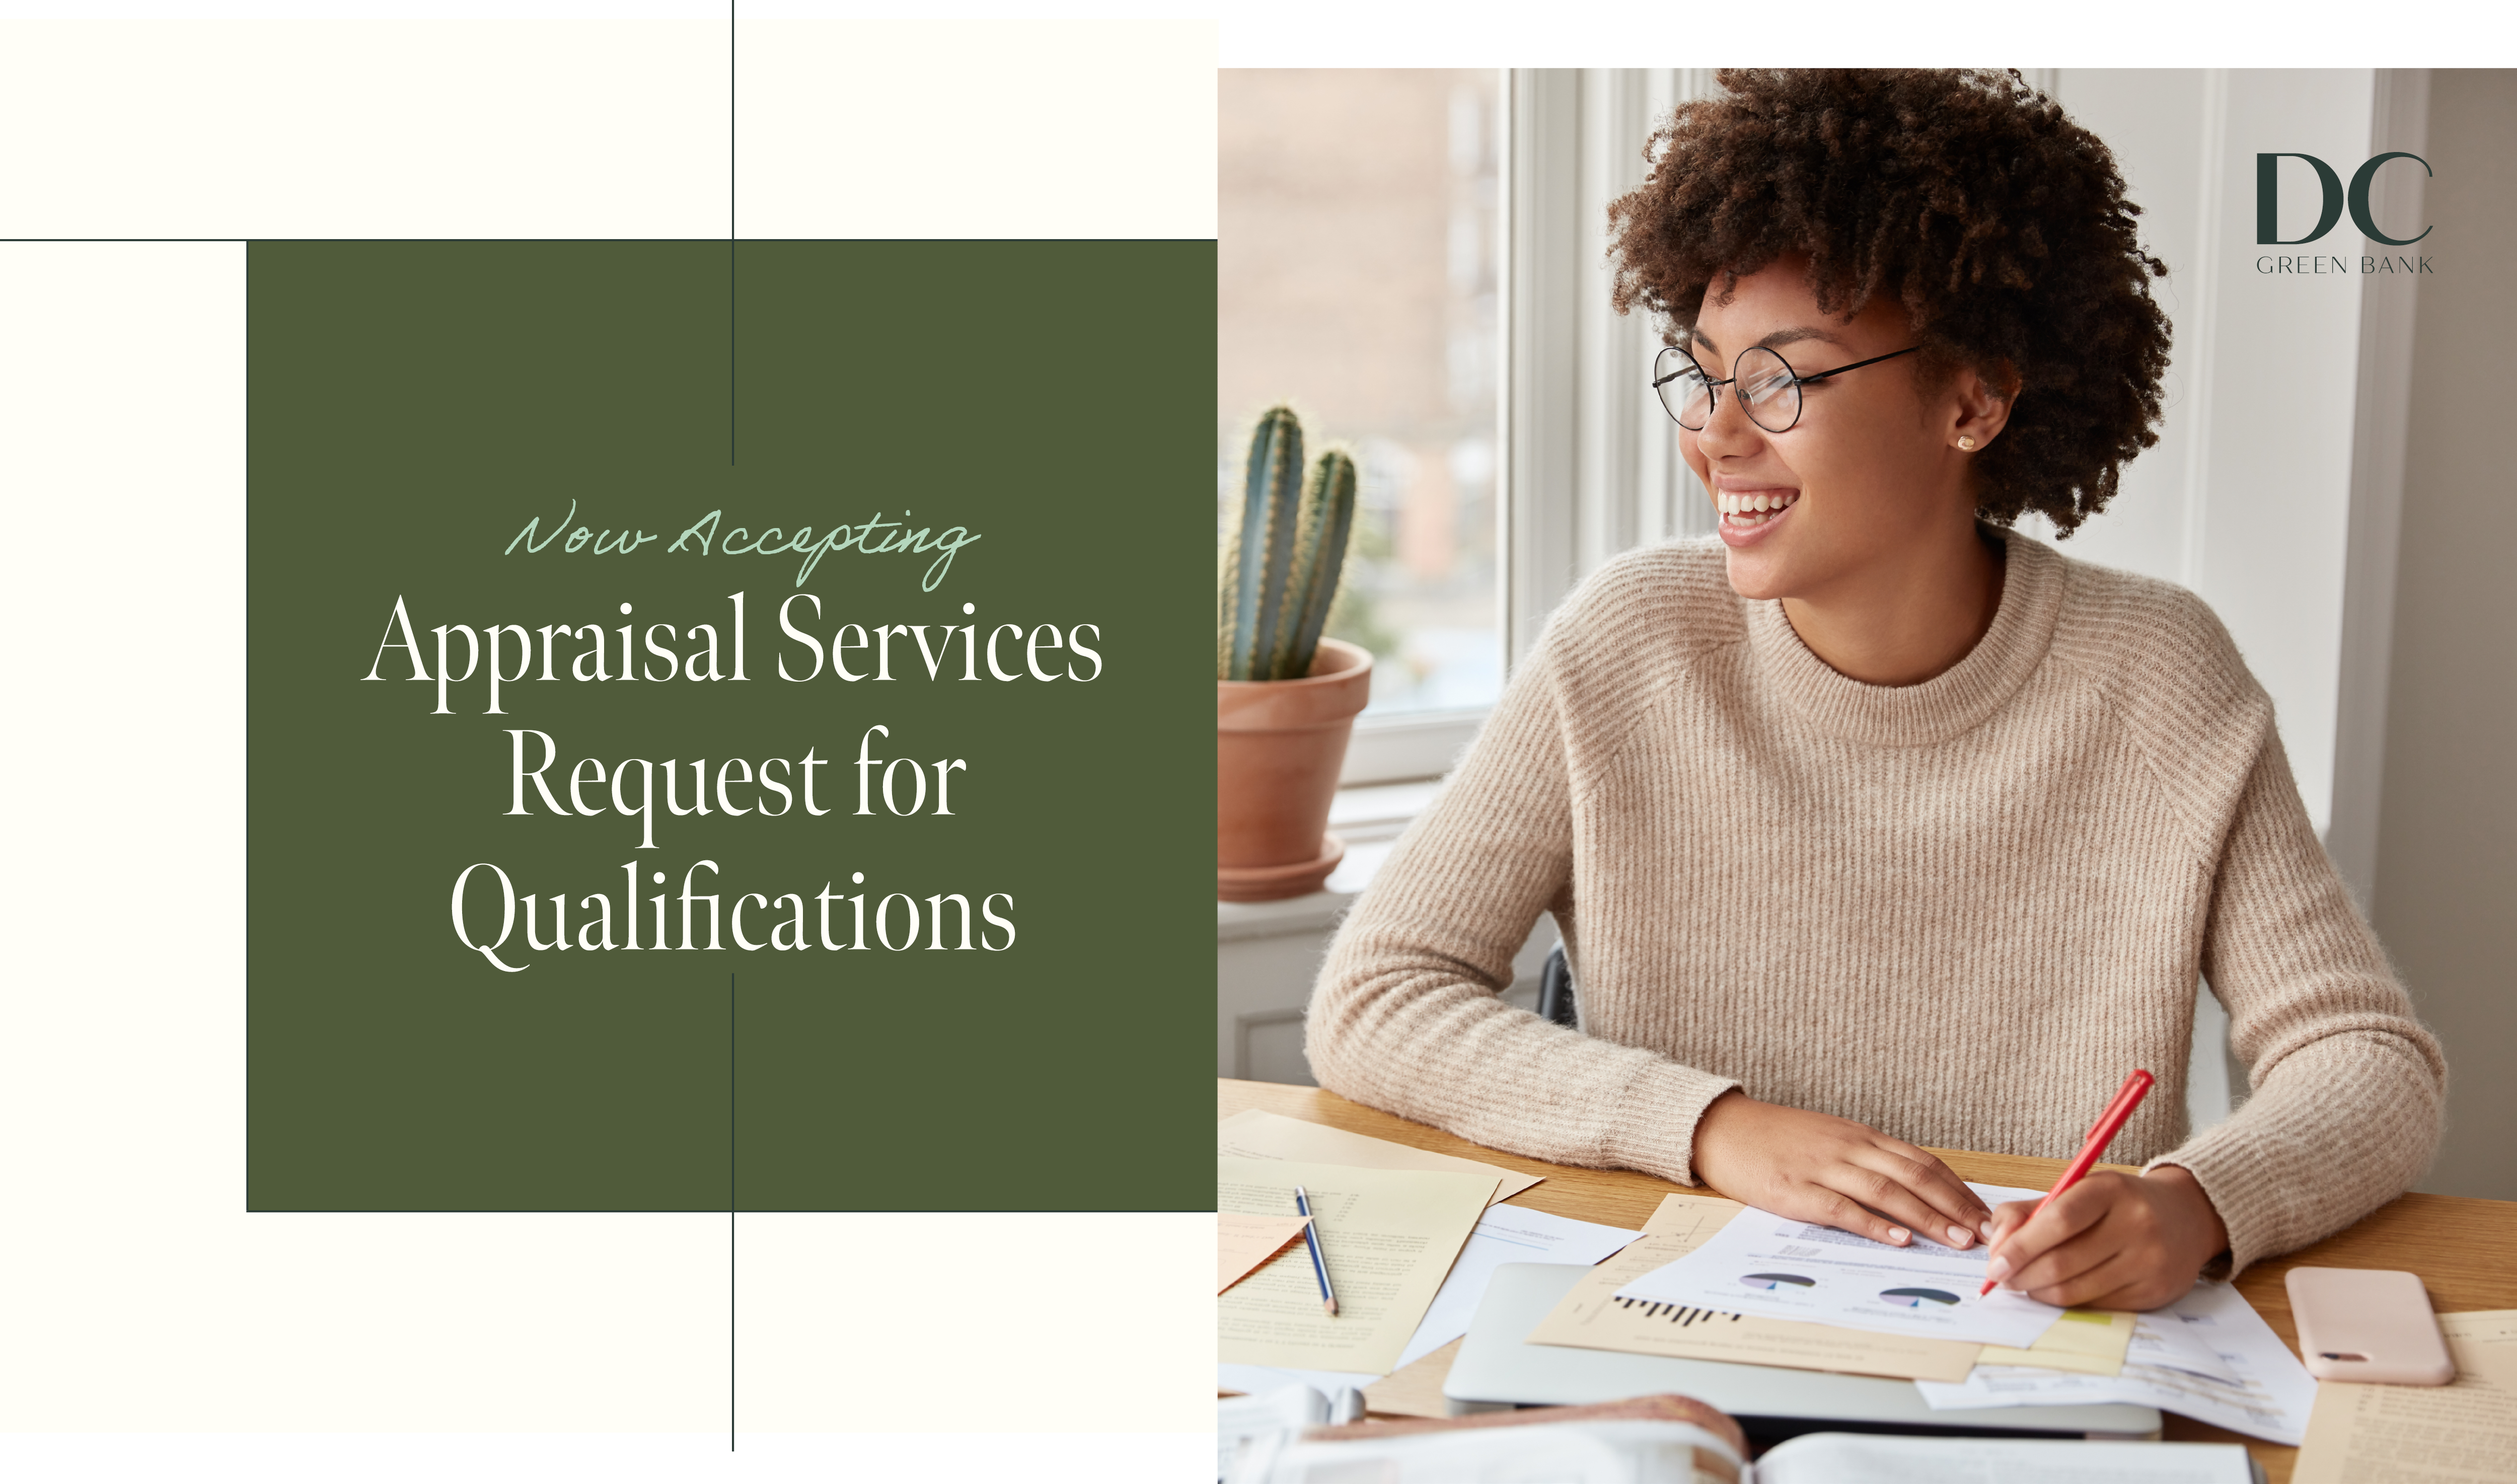 REAL ESTATE APPRAISAL SERVICES REQUEST FOR QUALIFICATIONS (RFQ)